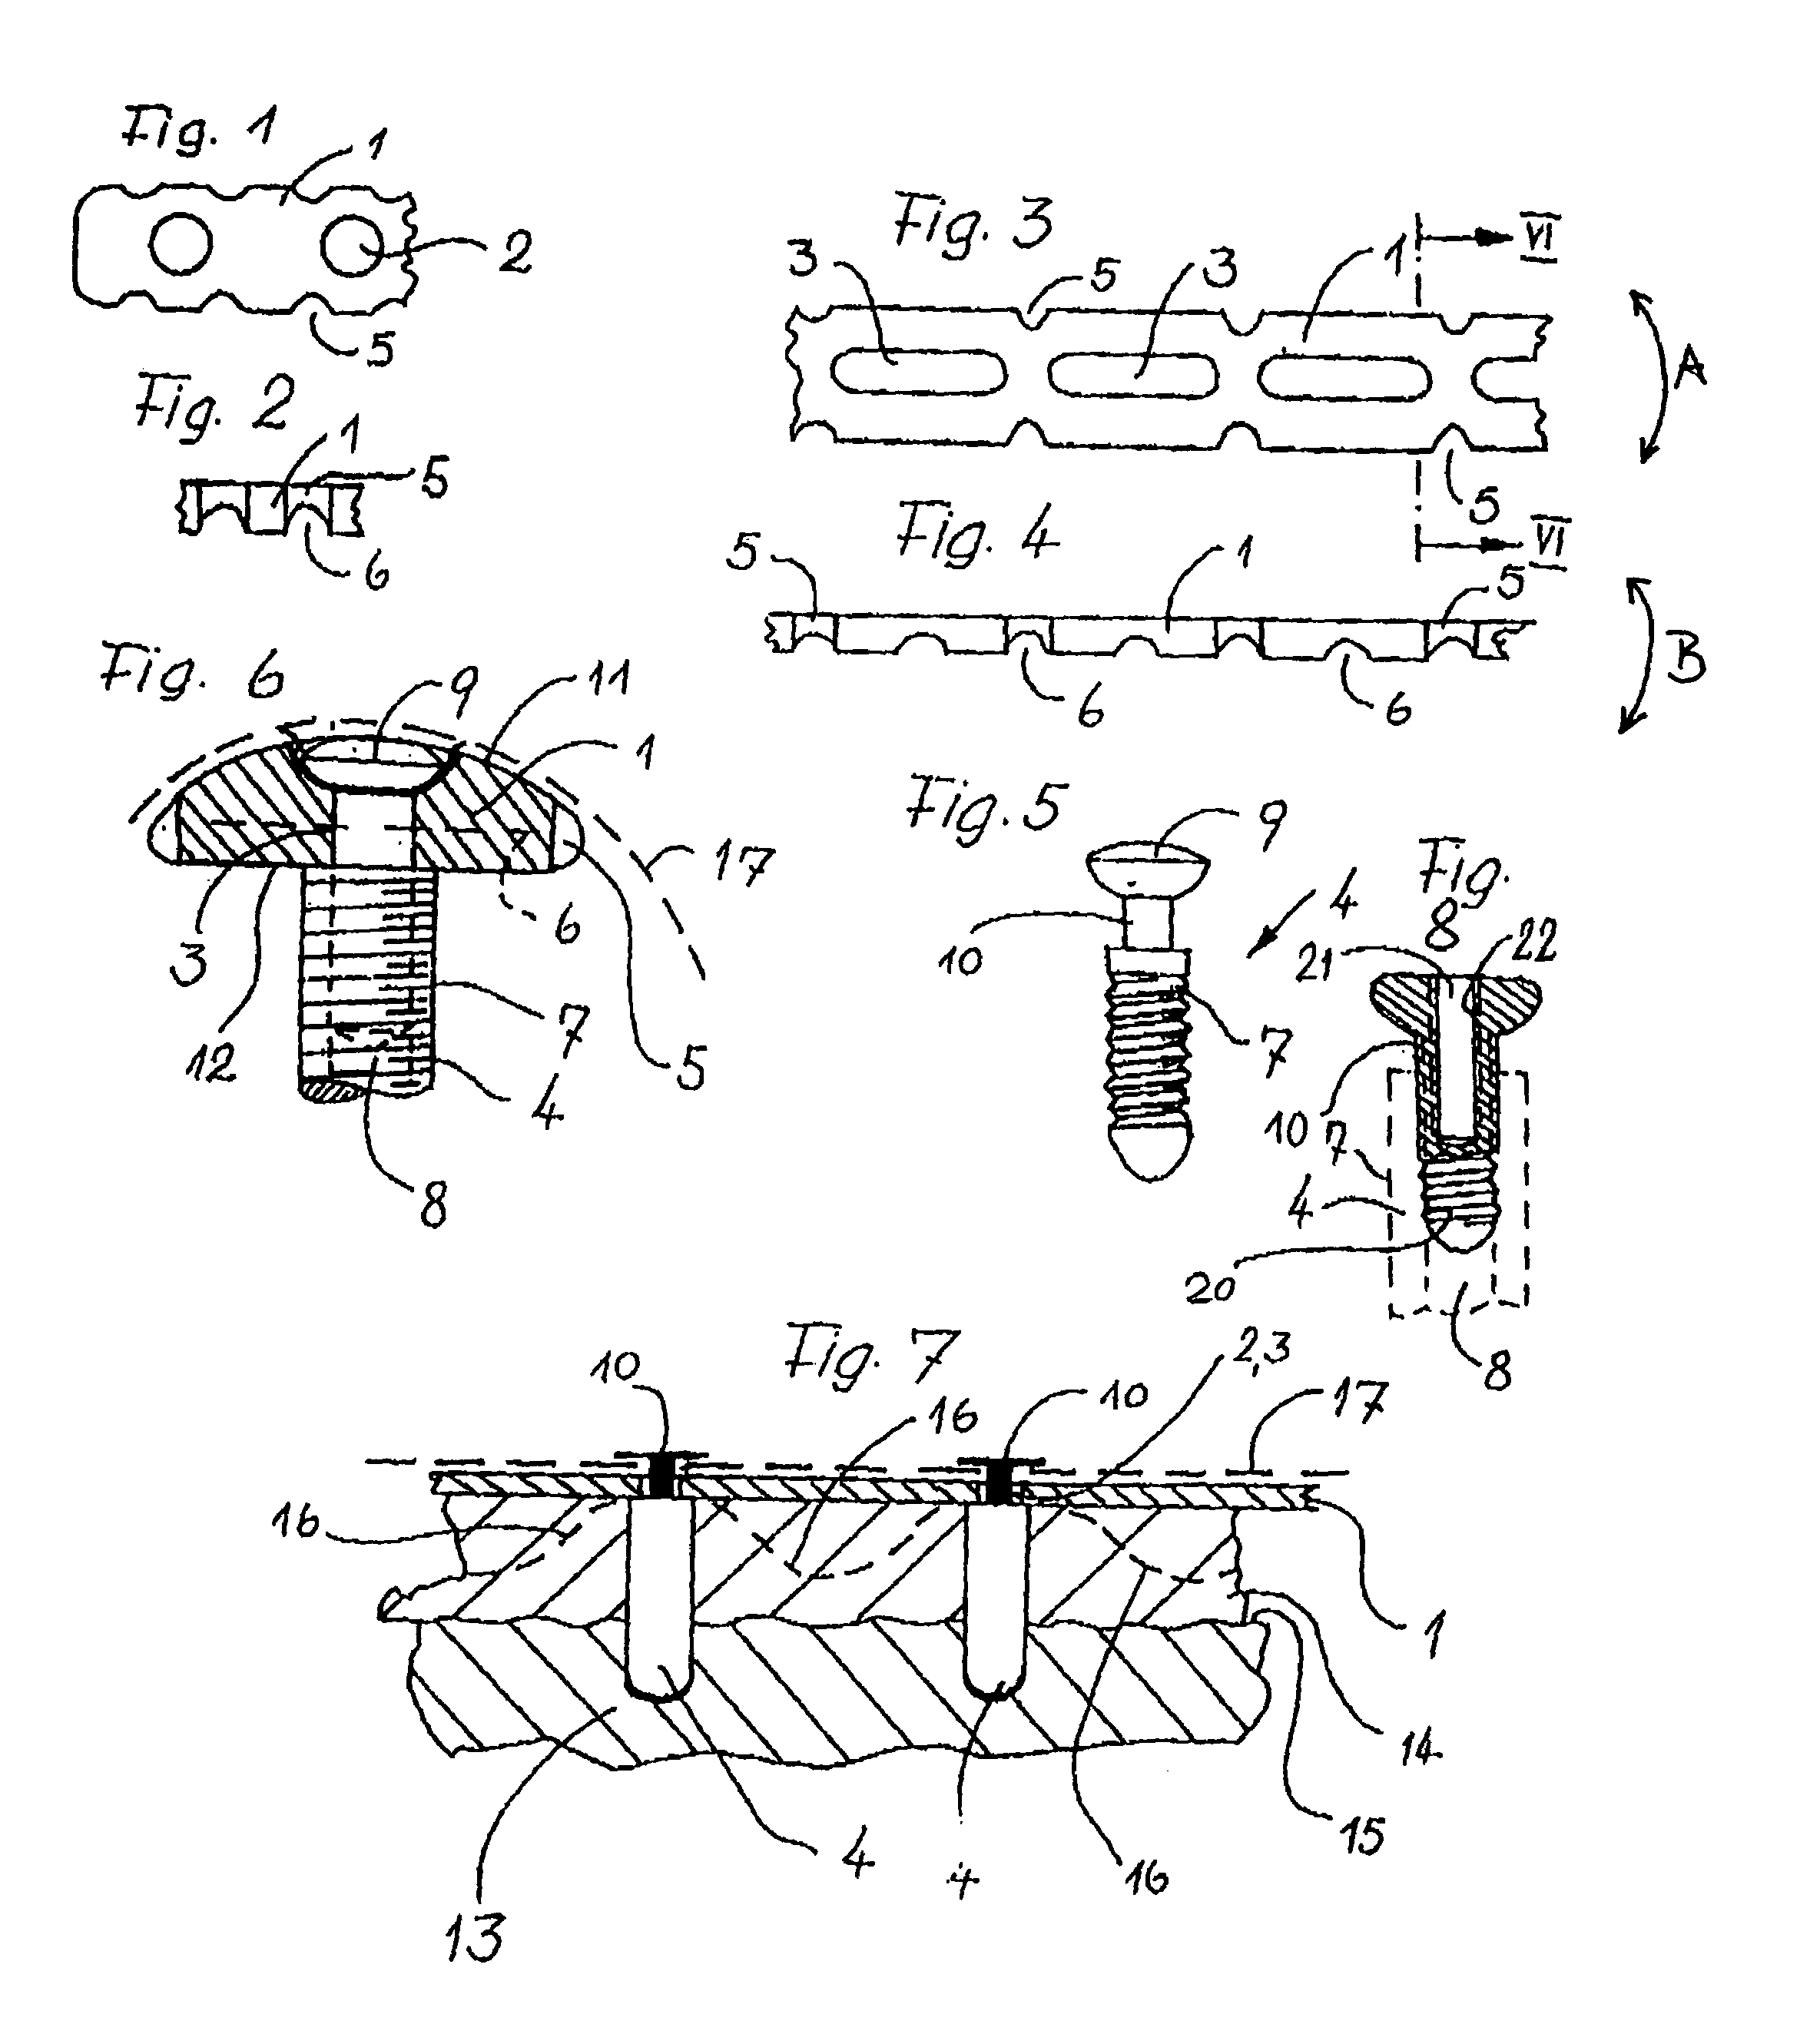 Device for regenerating, repairing, and modeling human and animal bone, especially the jaw area for dental applications